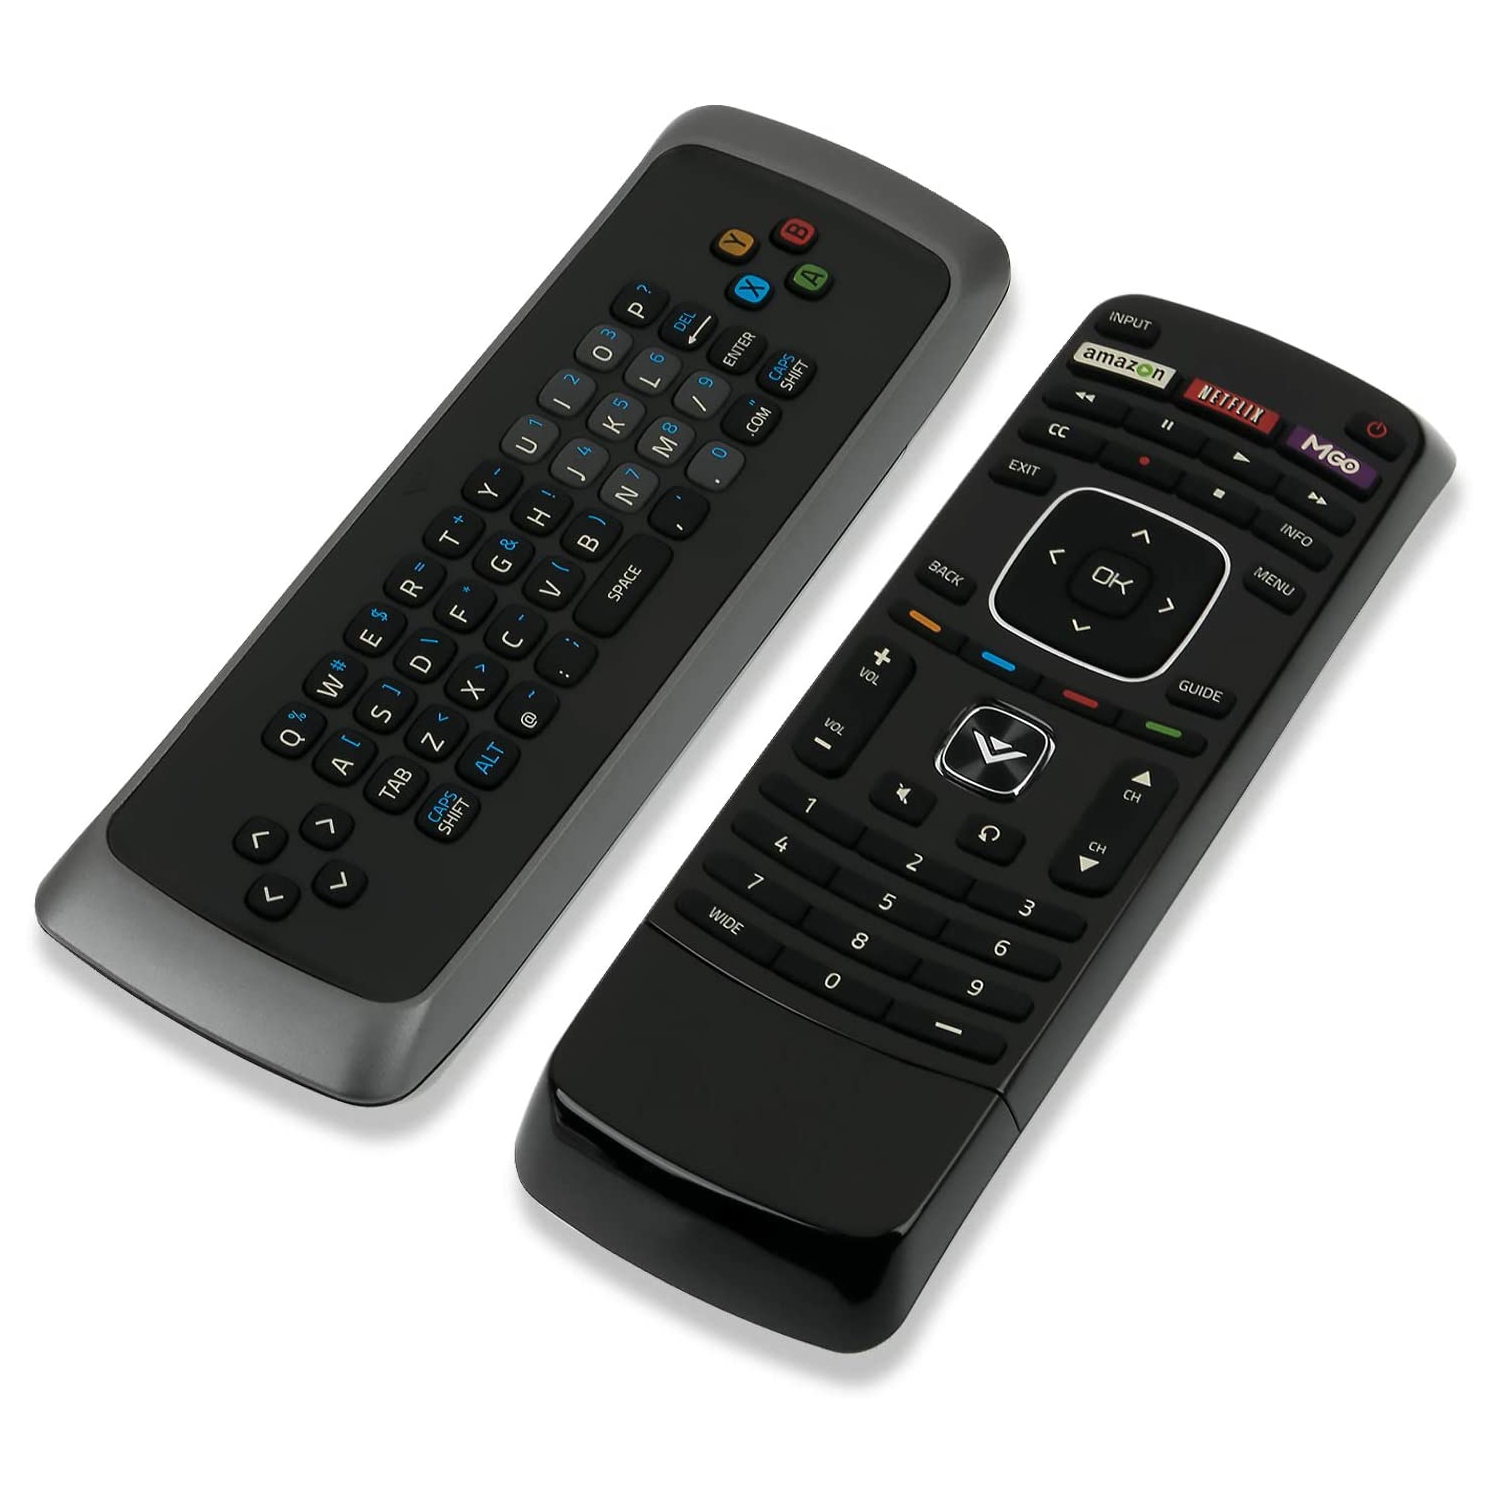 New XRT302 QWERTY Keyboard Replaced Remote fit for VIZIO Internet TV E601i-A3 E701i-A3 E650i-A2 D650i-B2 M420SV M470SV